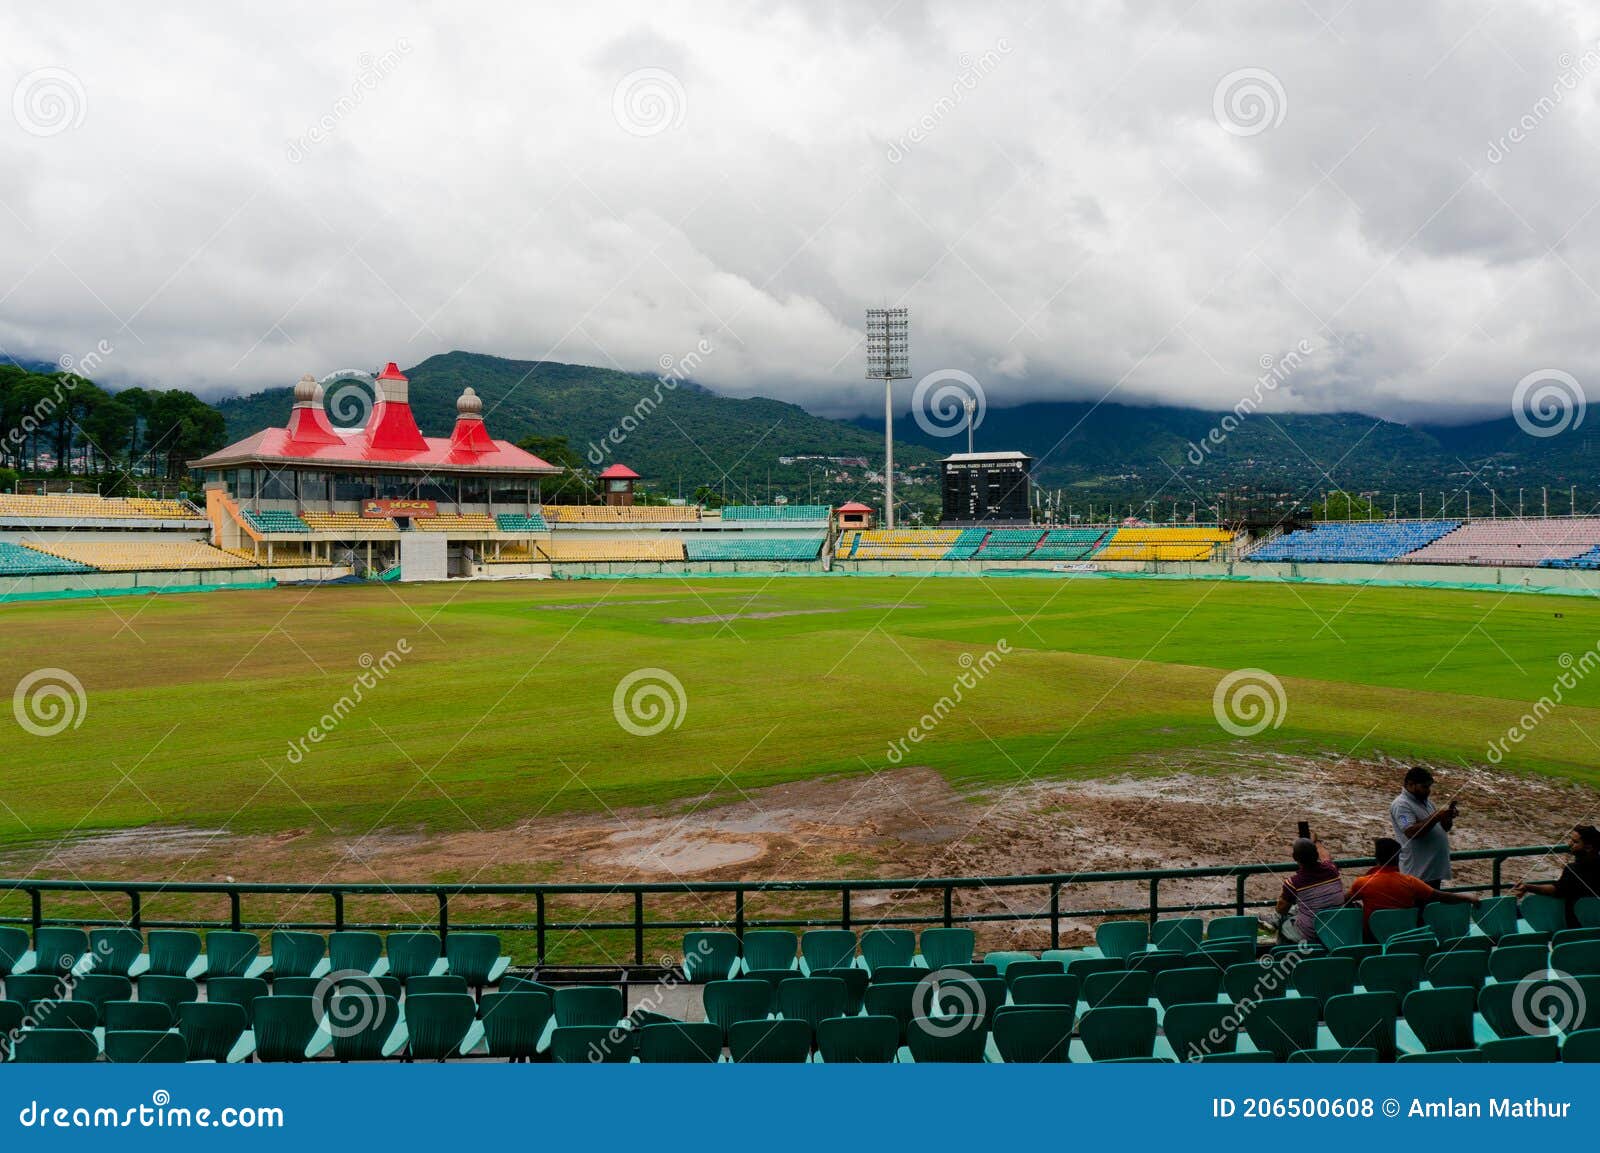 Wide Angle Shot of the Famed Dharamshala Cricket Stadium the Worlds ...